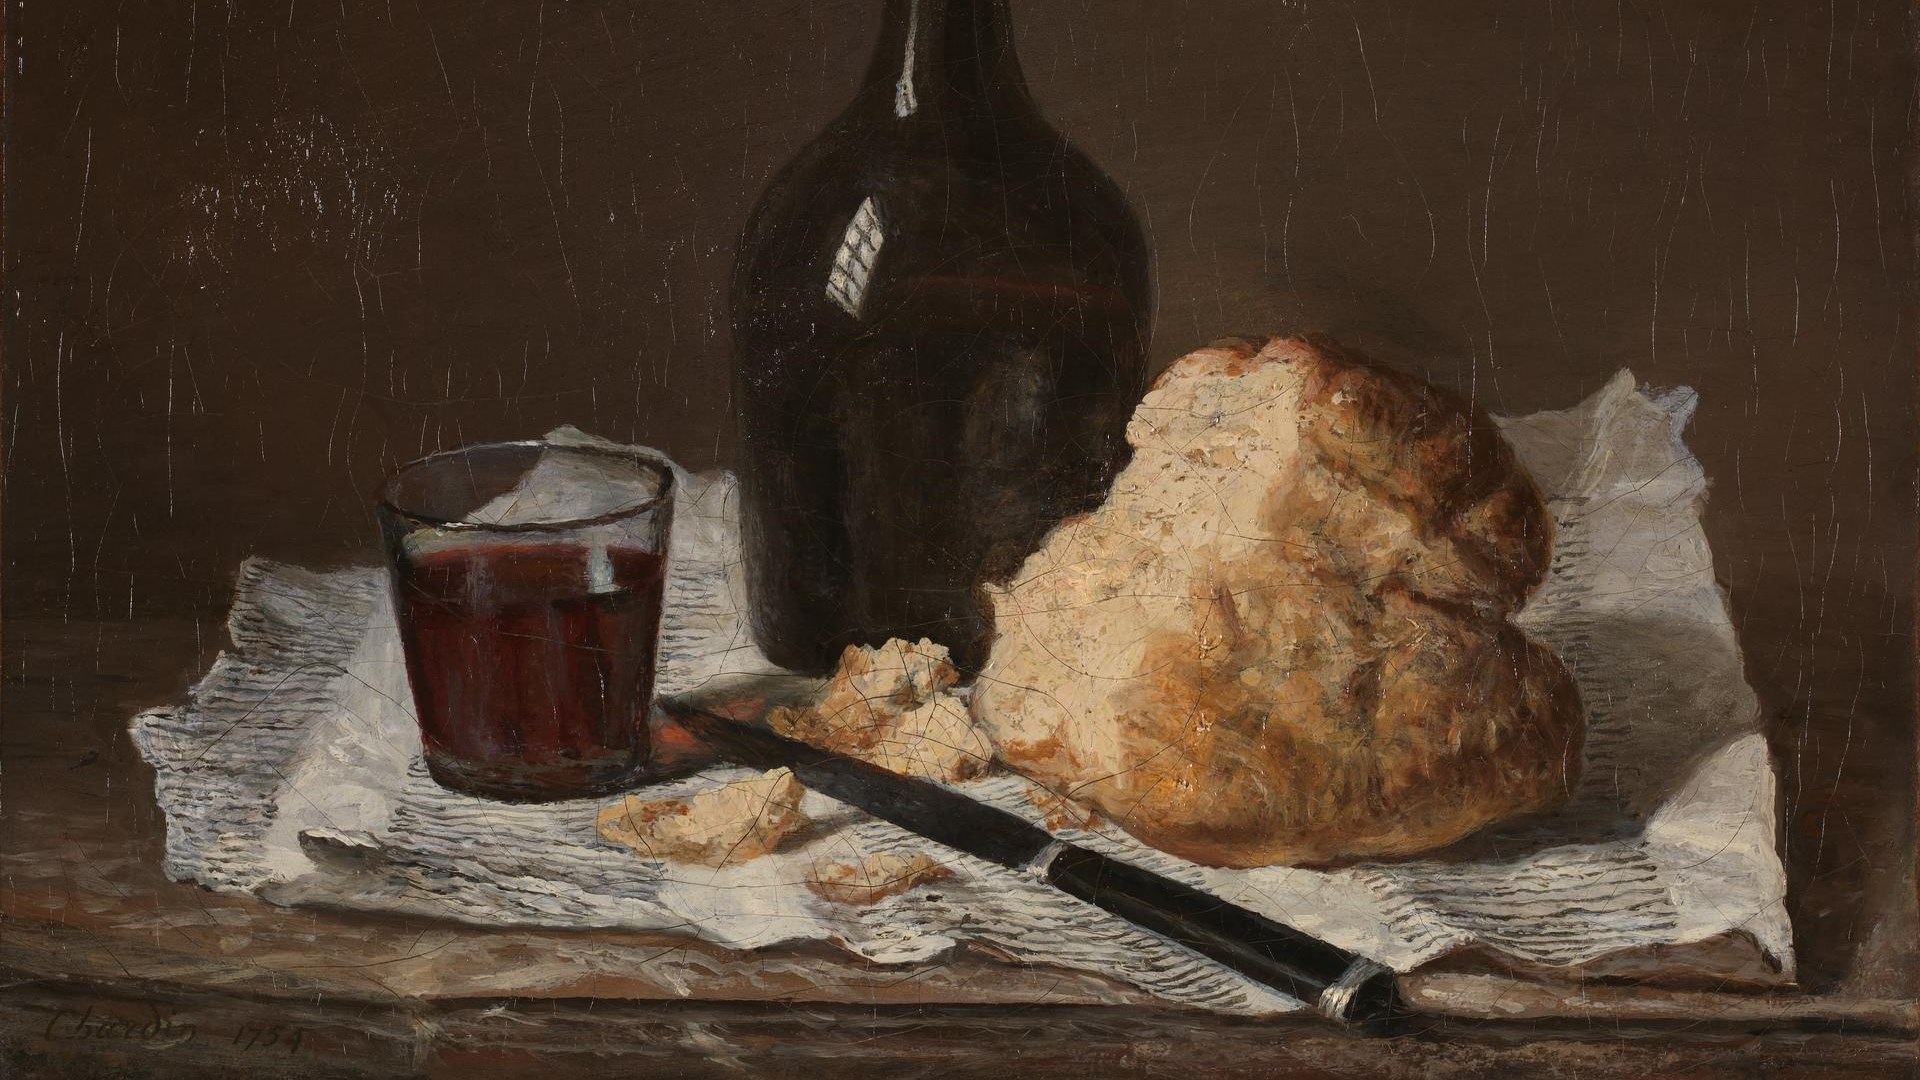 oil painting of a glass of wine, bread, and a bottle on a white cloth with a breadknife